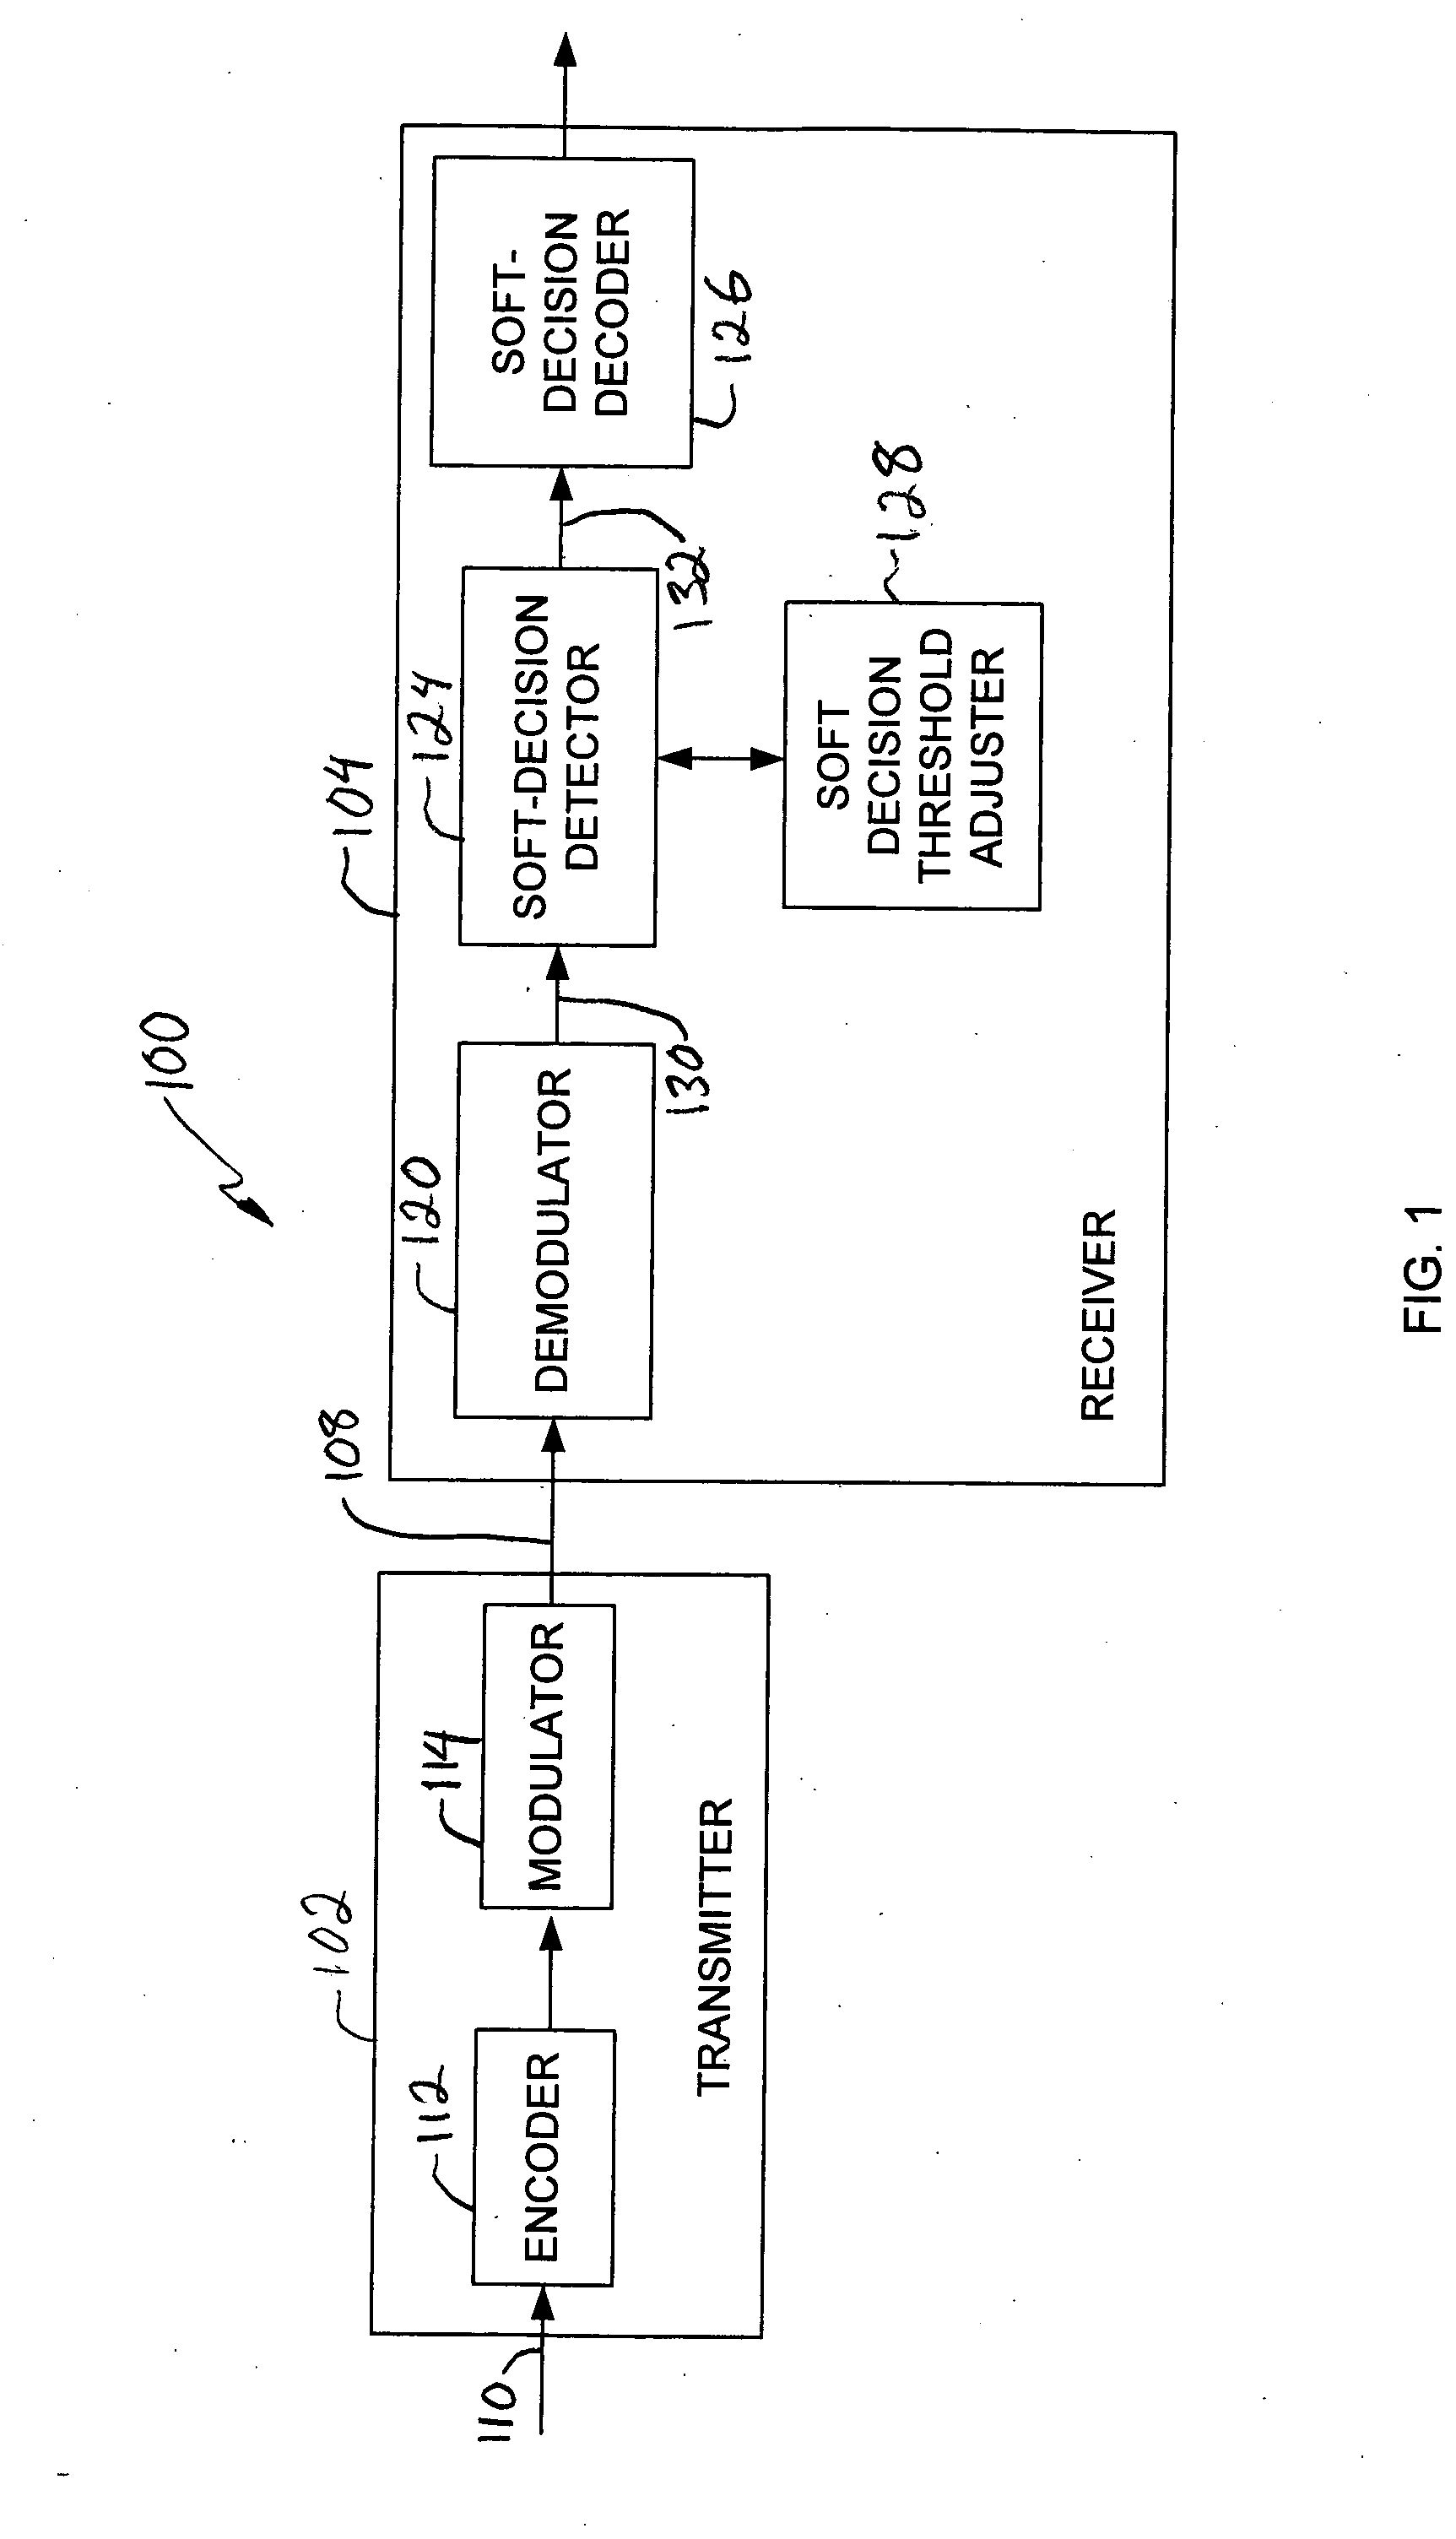 System and method for adjusting soft decision thresholds in a soft-decision error correction system